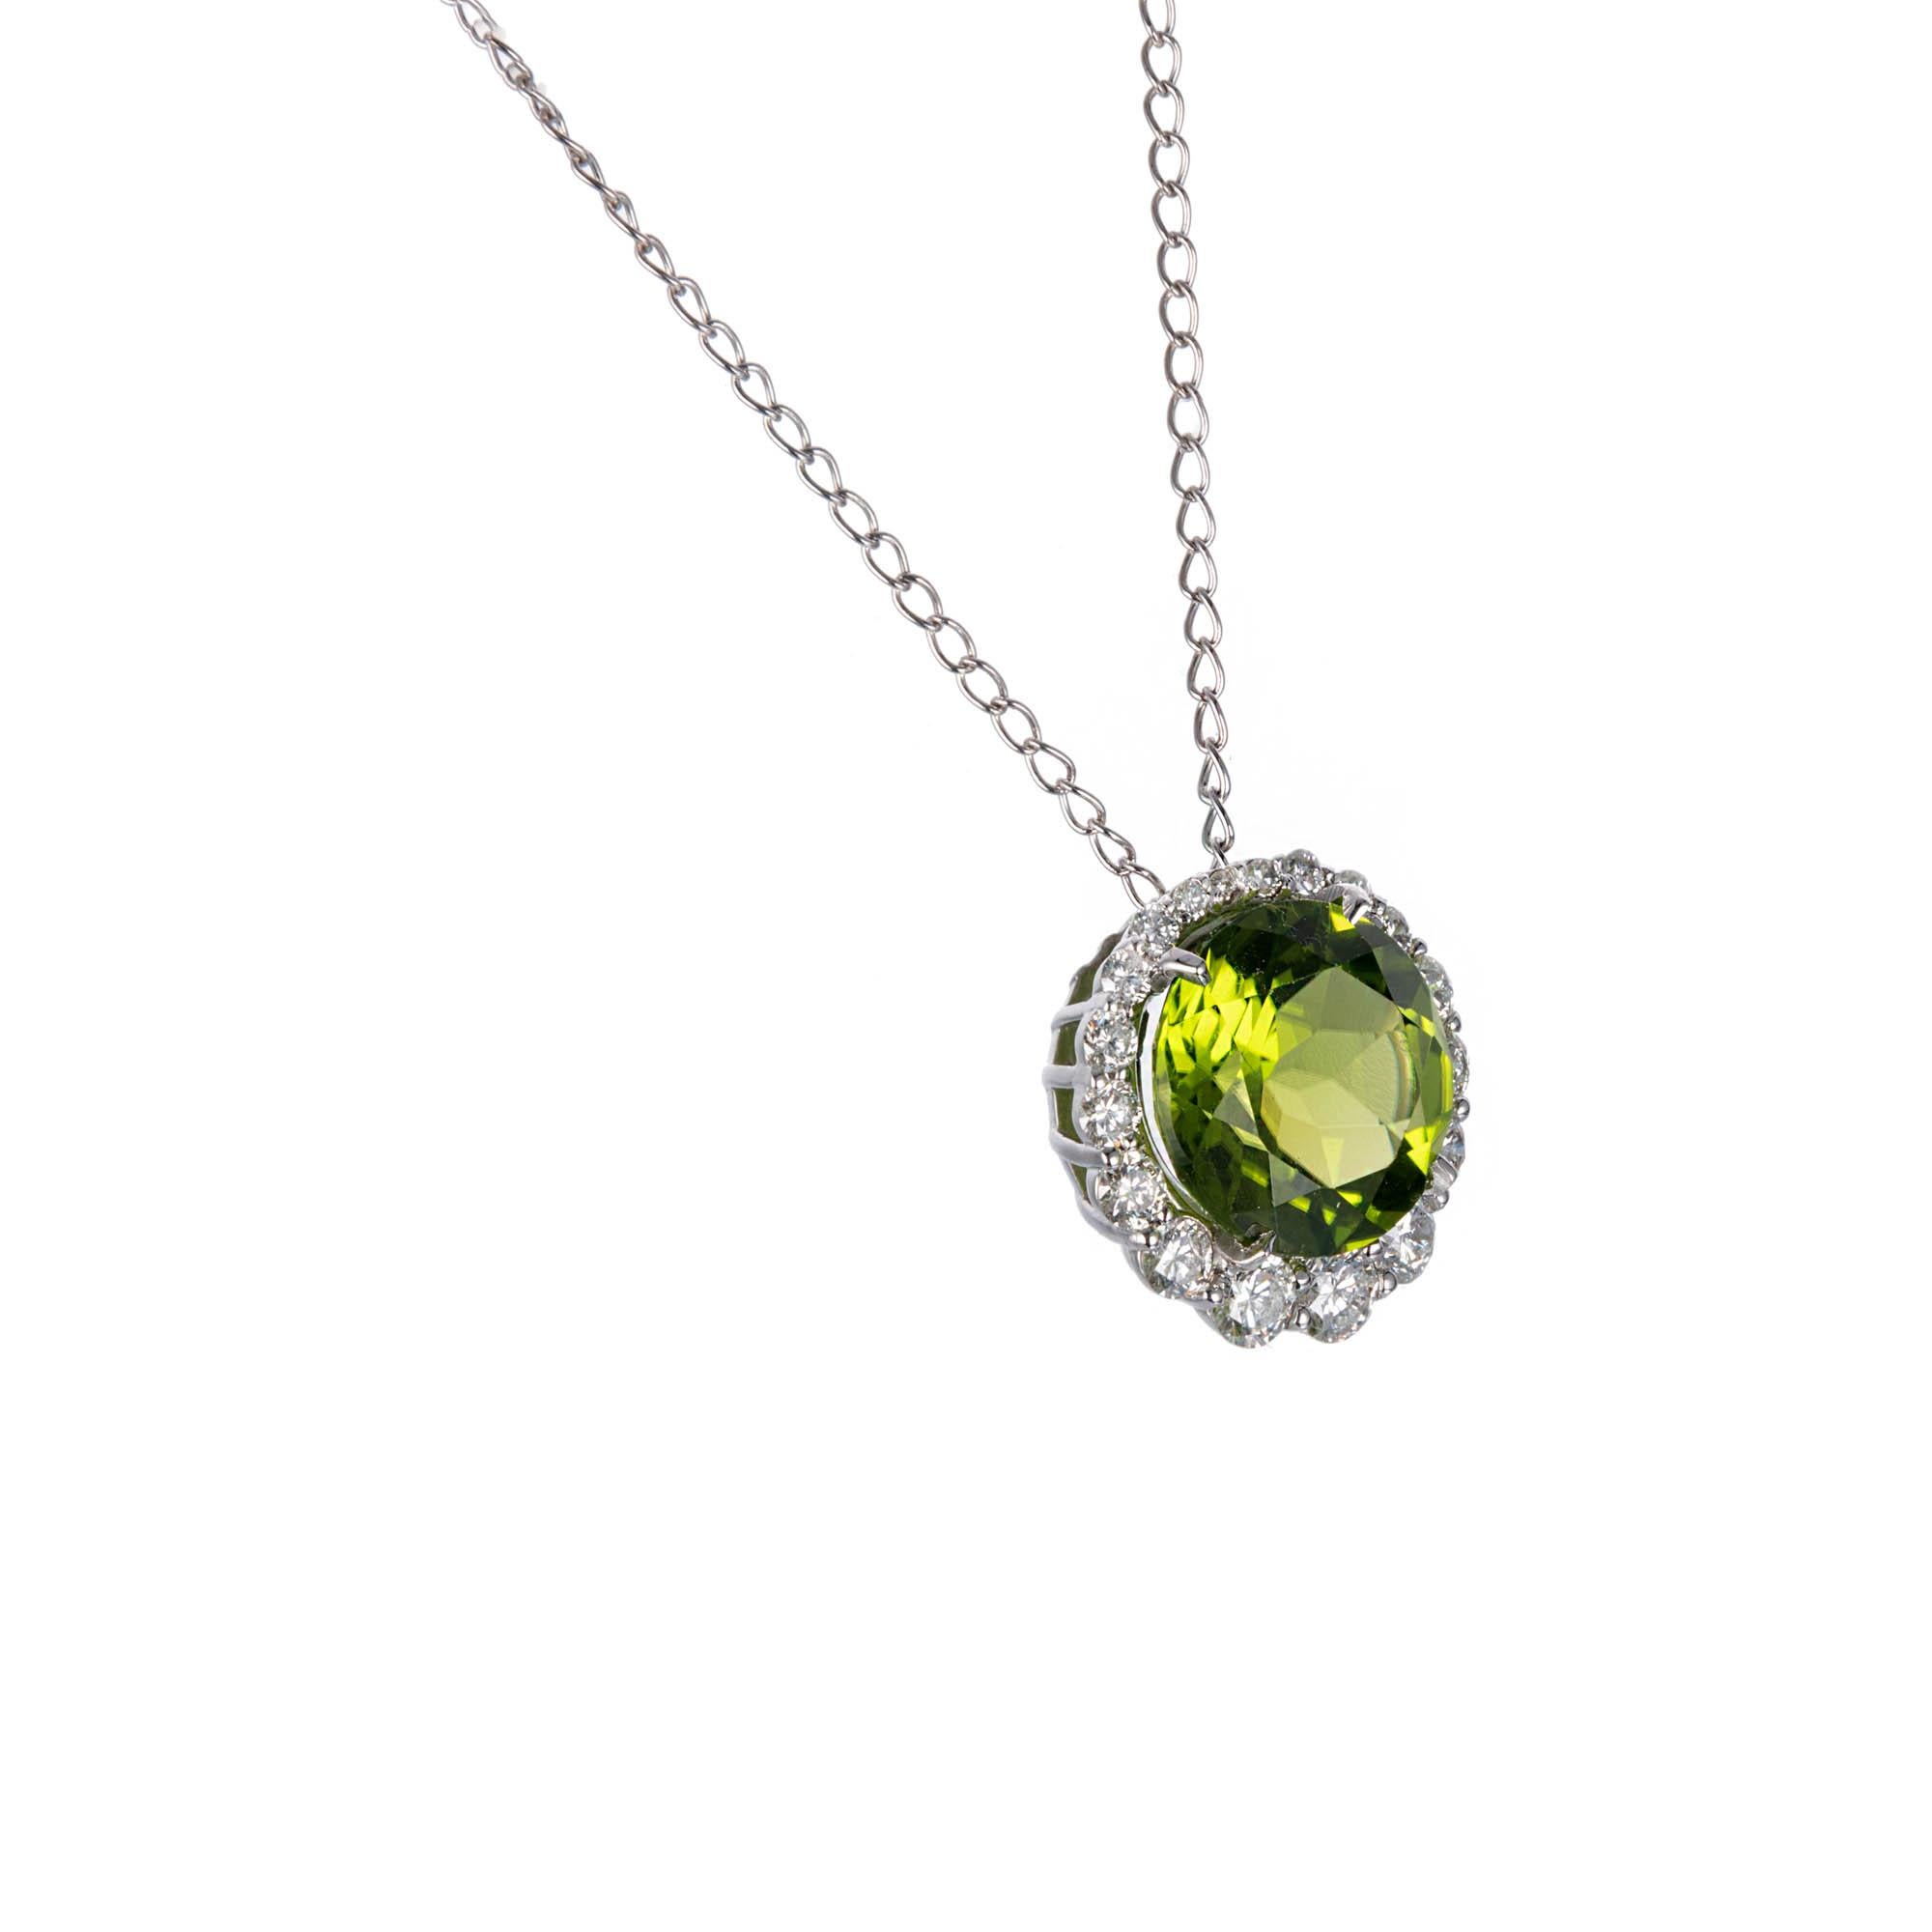 Green round Peridot pendant with a halo of white diamonds, on an 18k white gold chain. 

1 round fine green Peridot, approx. total weight 3.00cts, 10mm
18 round full cut diamonds, approx. total weight .57cts, F, VS
14k white gold
Tested and stamped: